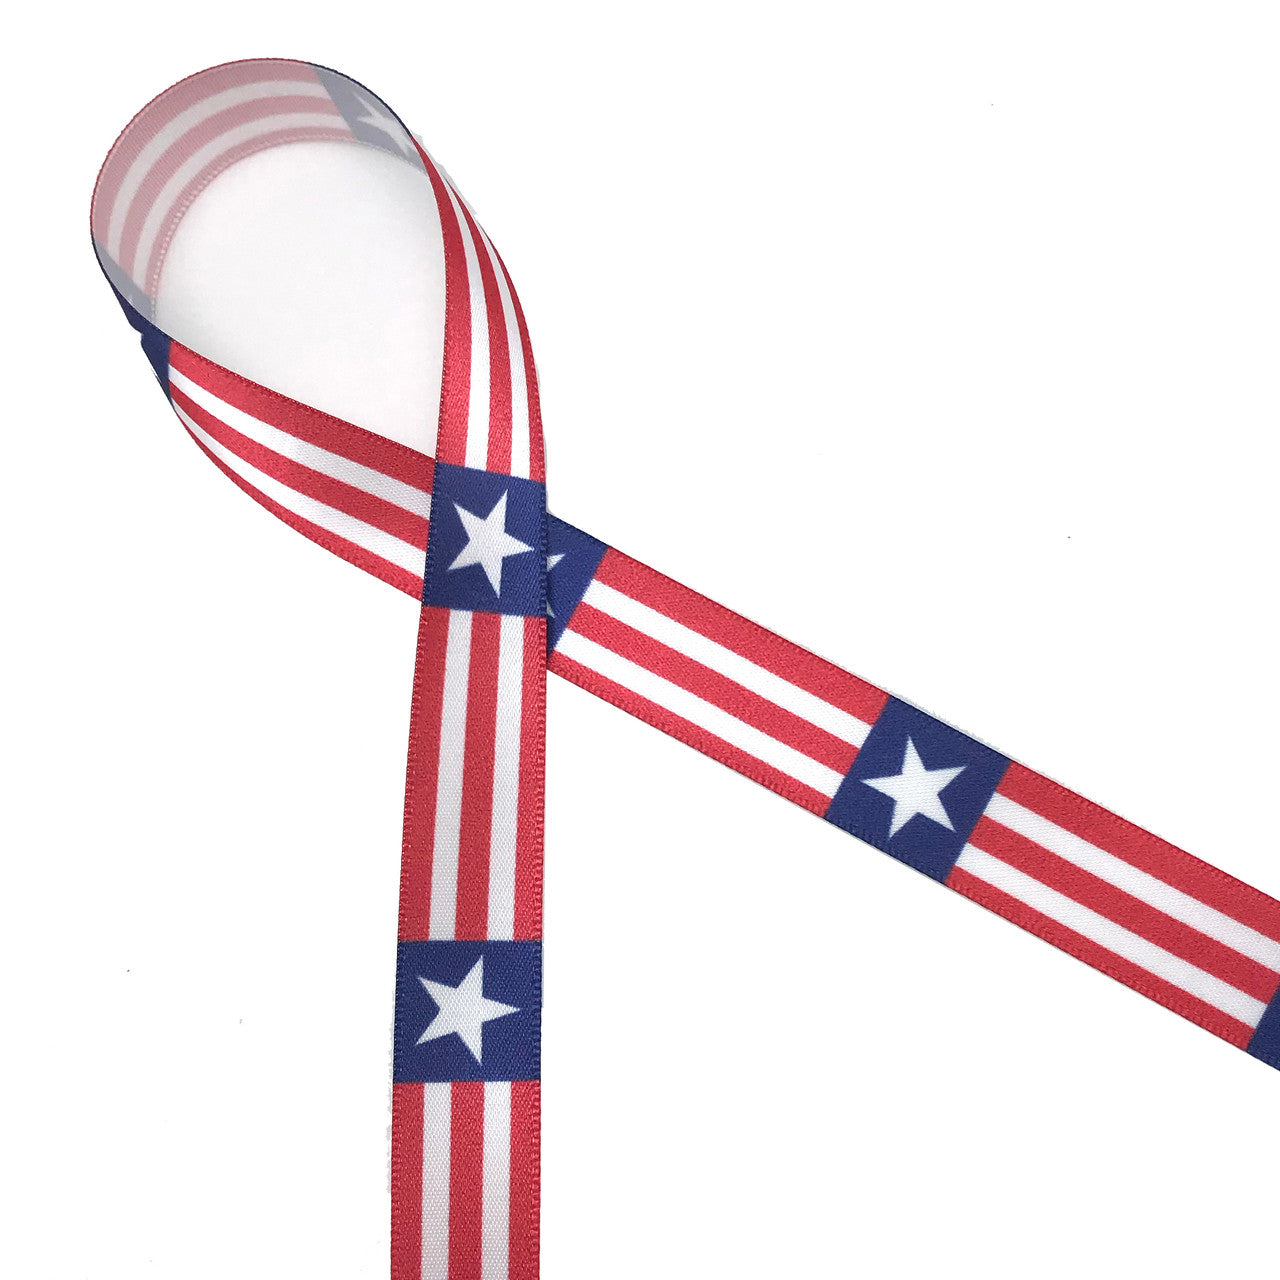 Red and white stripe with star ribbon printed on 5/8" white single face satin ribbon